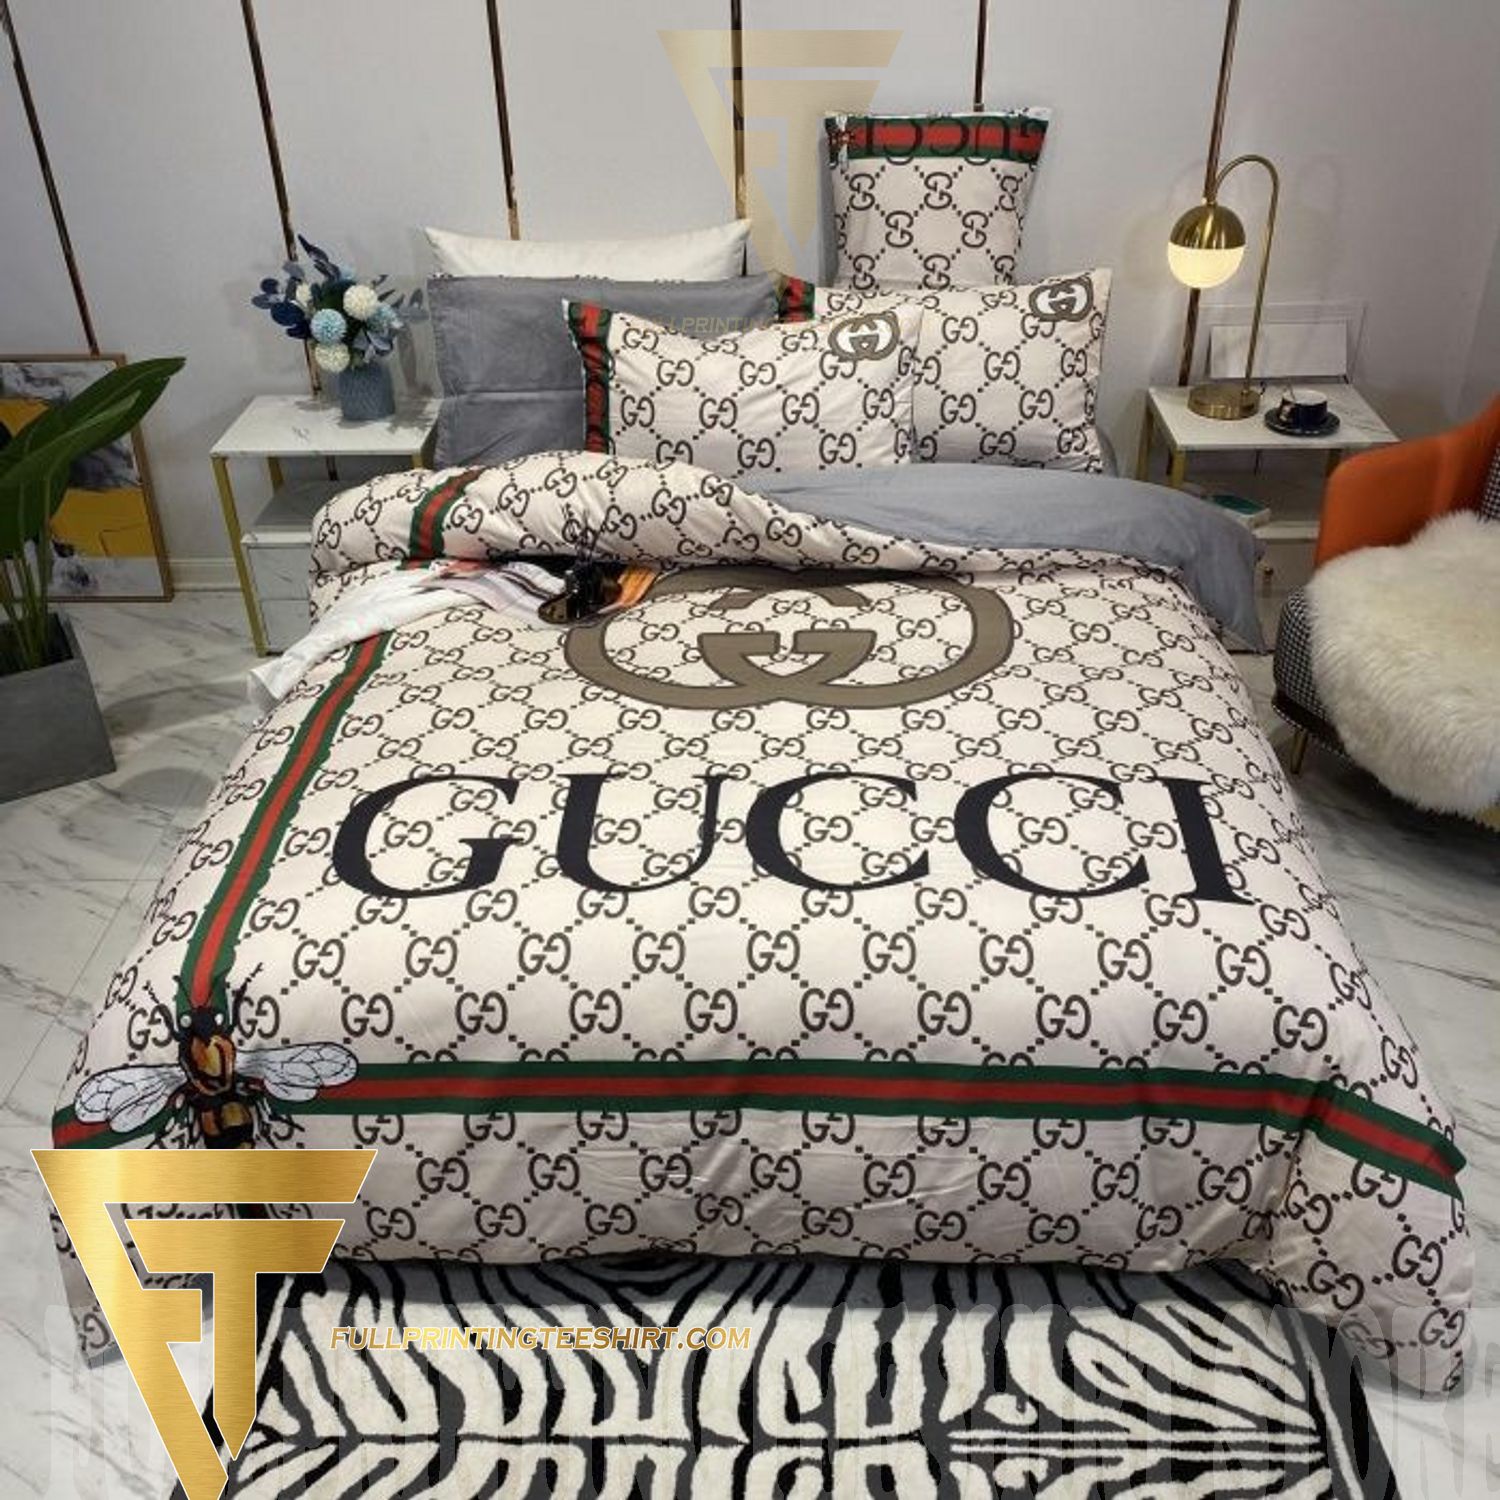 Top-selling item] Gucci Type 09 Luxury Brand Home Decor Duvet Cover Bedroom  Sets